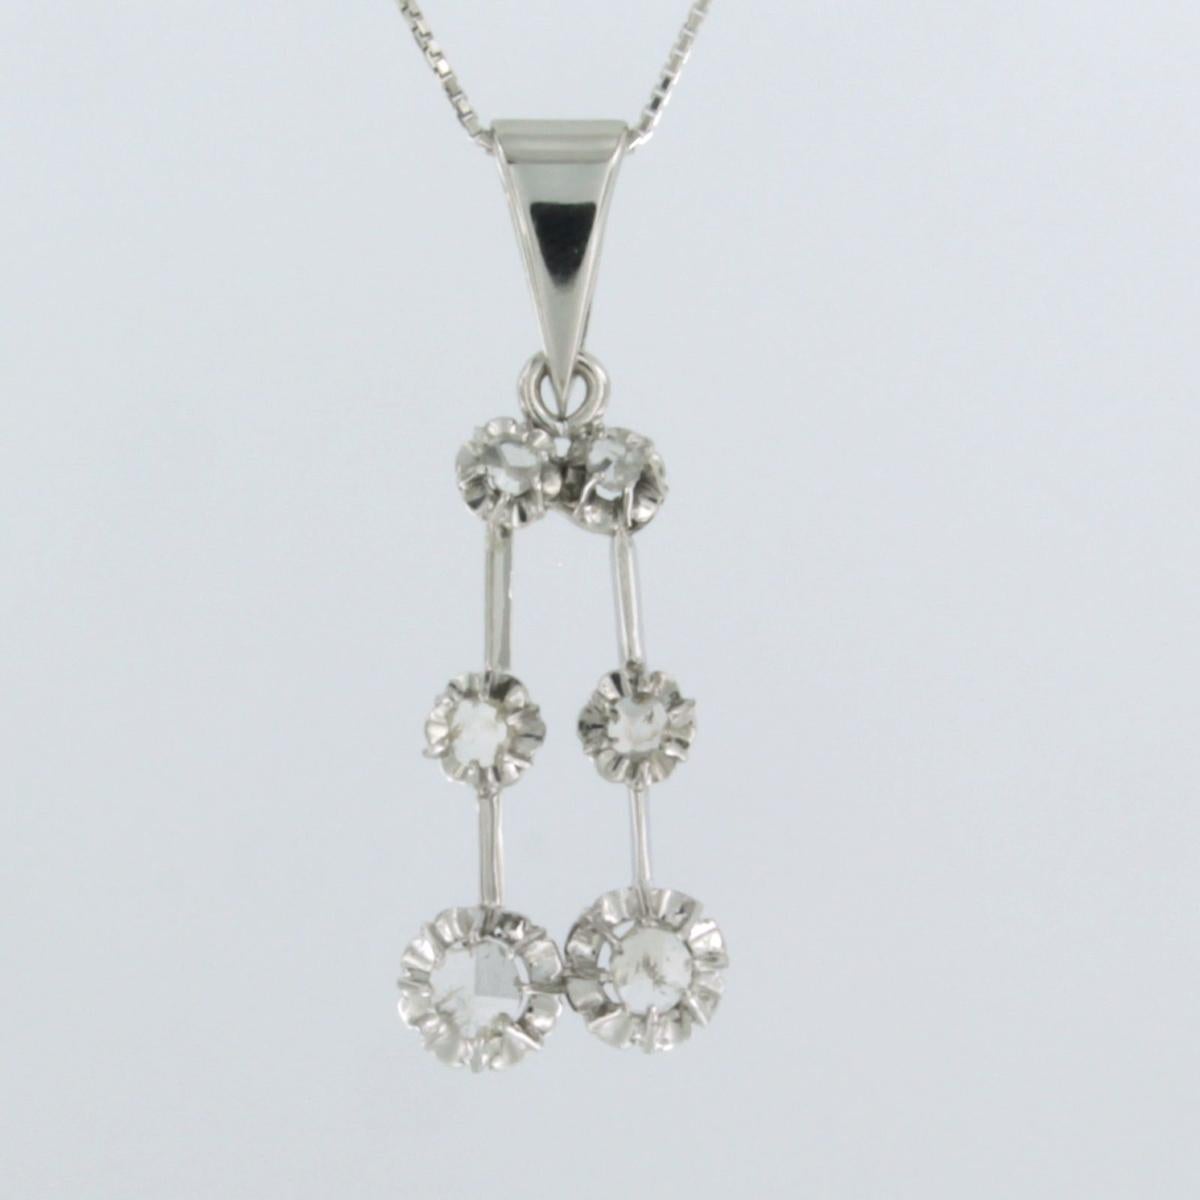 18k white gold necklace with pendant set with rose diamonds. 0.30ct - F/G - VS/SI - 44 cm long

detailed description:

the length of the necklace is 44 cm long by 0.5 mm wide

The size of the center piece is 3.3 cm long by 1.2 cm wide

weight 4.1